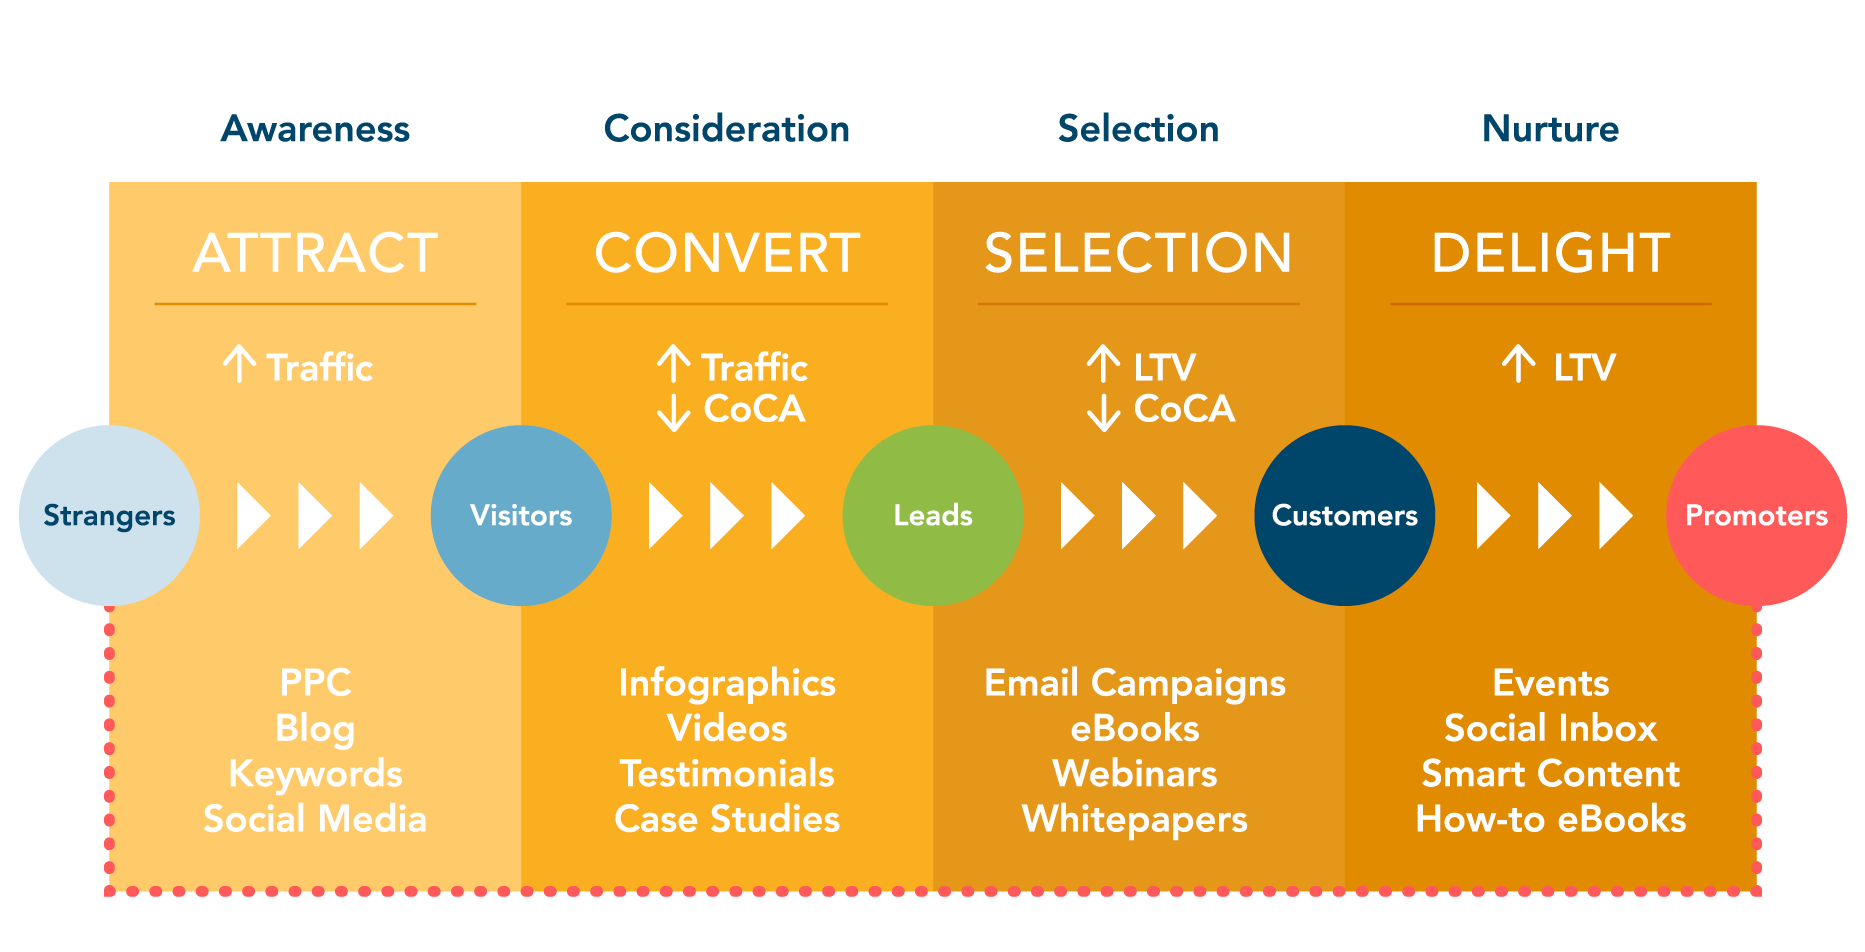 Inbound Methodology in 4 stages: Attract, Convert, Selection, Delight